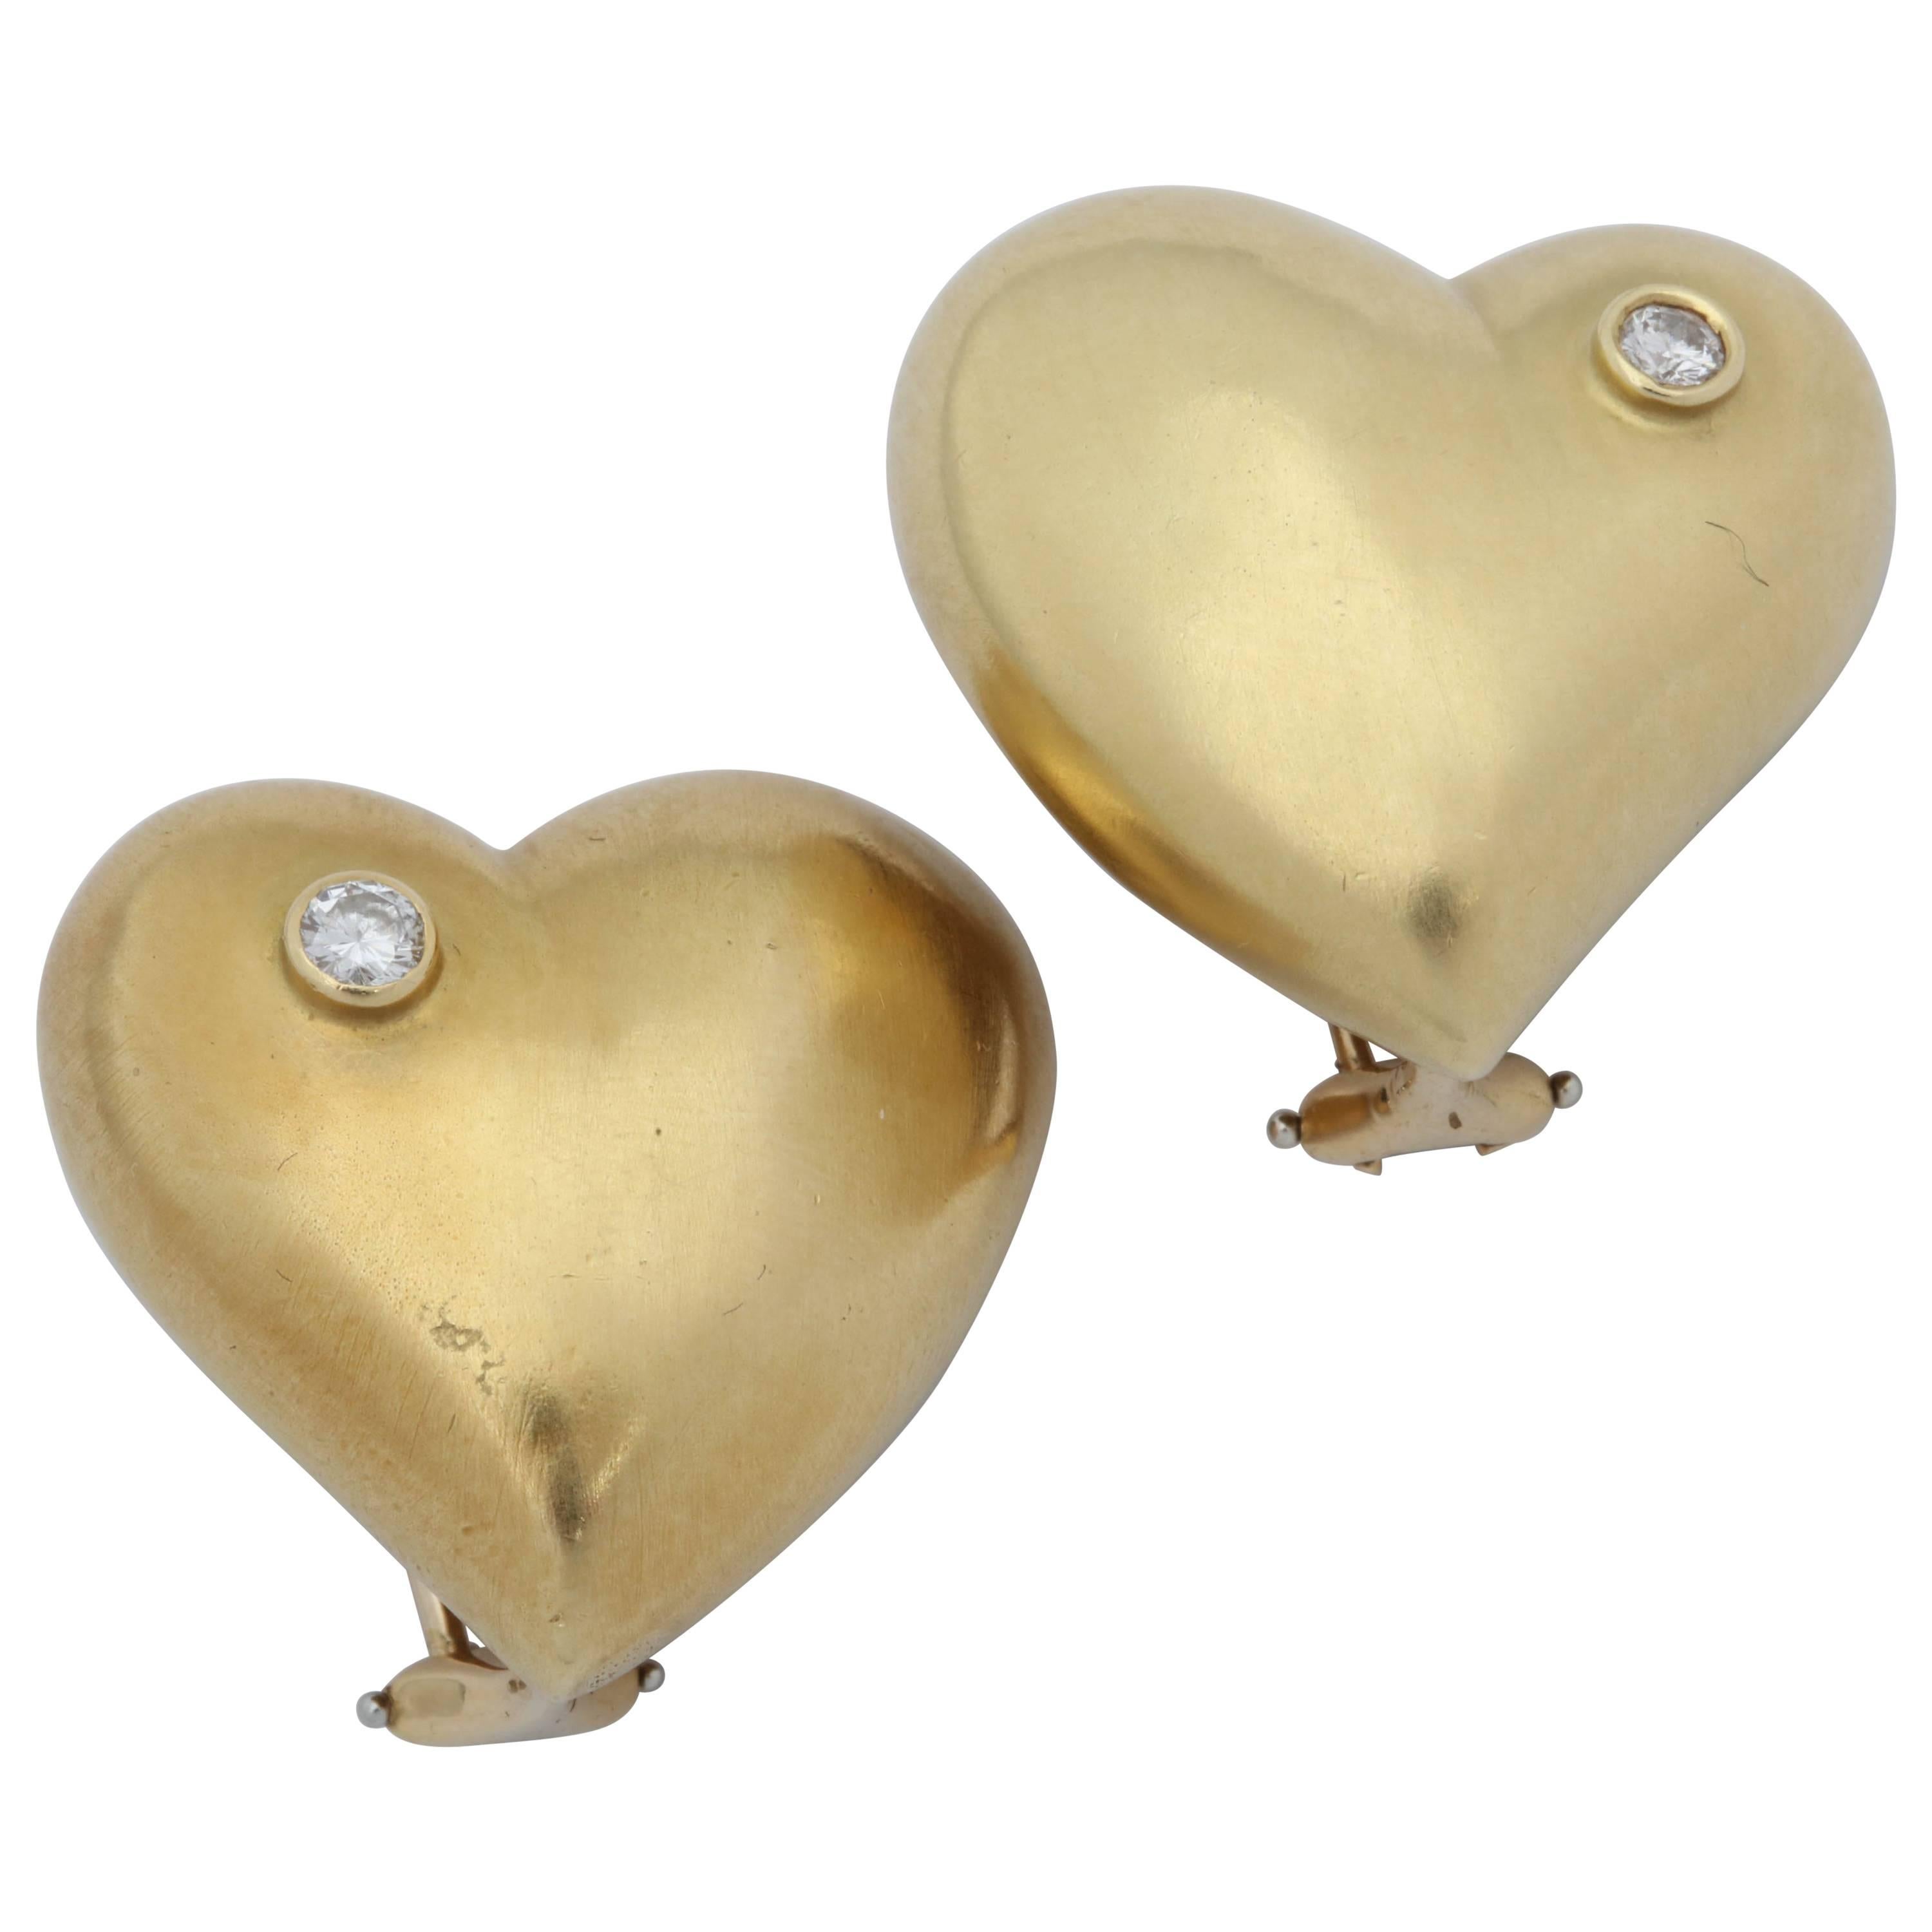 Marlene Stowe 1980s Diamond Puffy Heart Hand-Hammered Gold Earclips For Sale